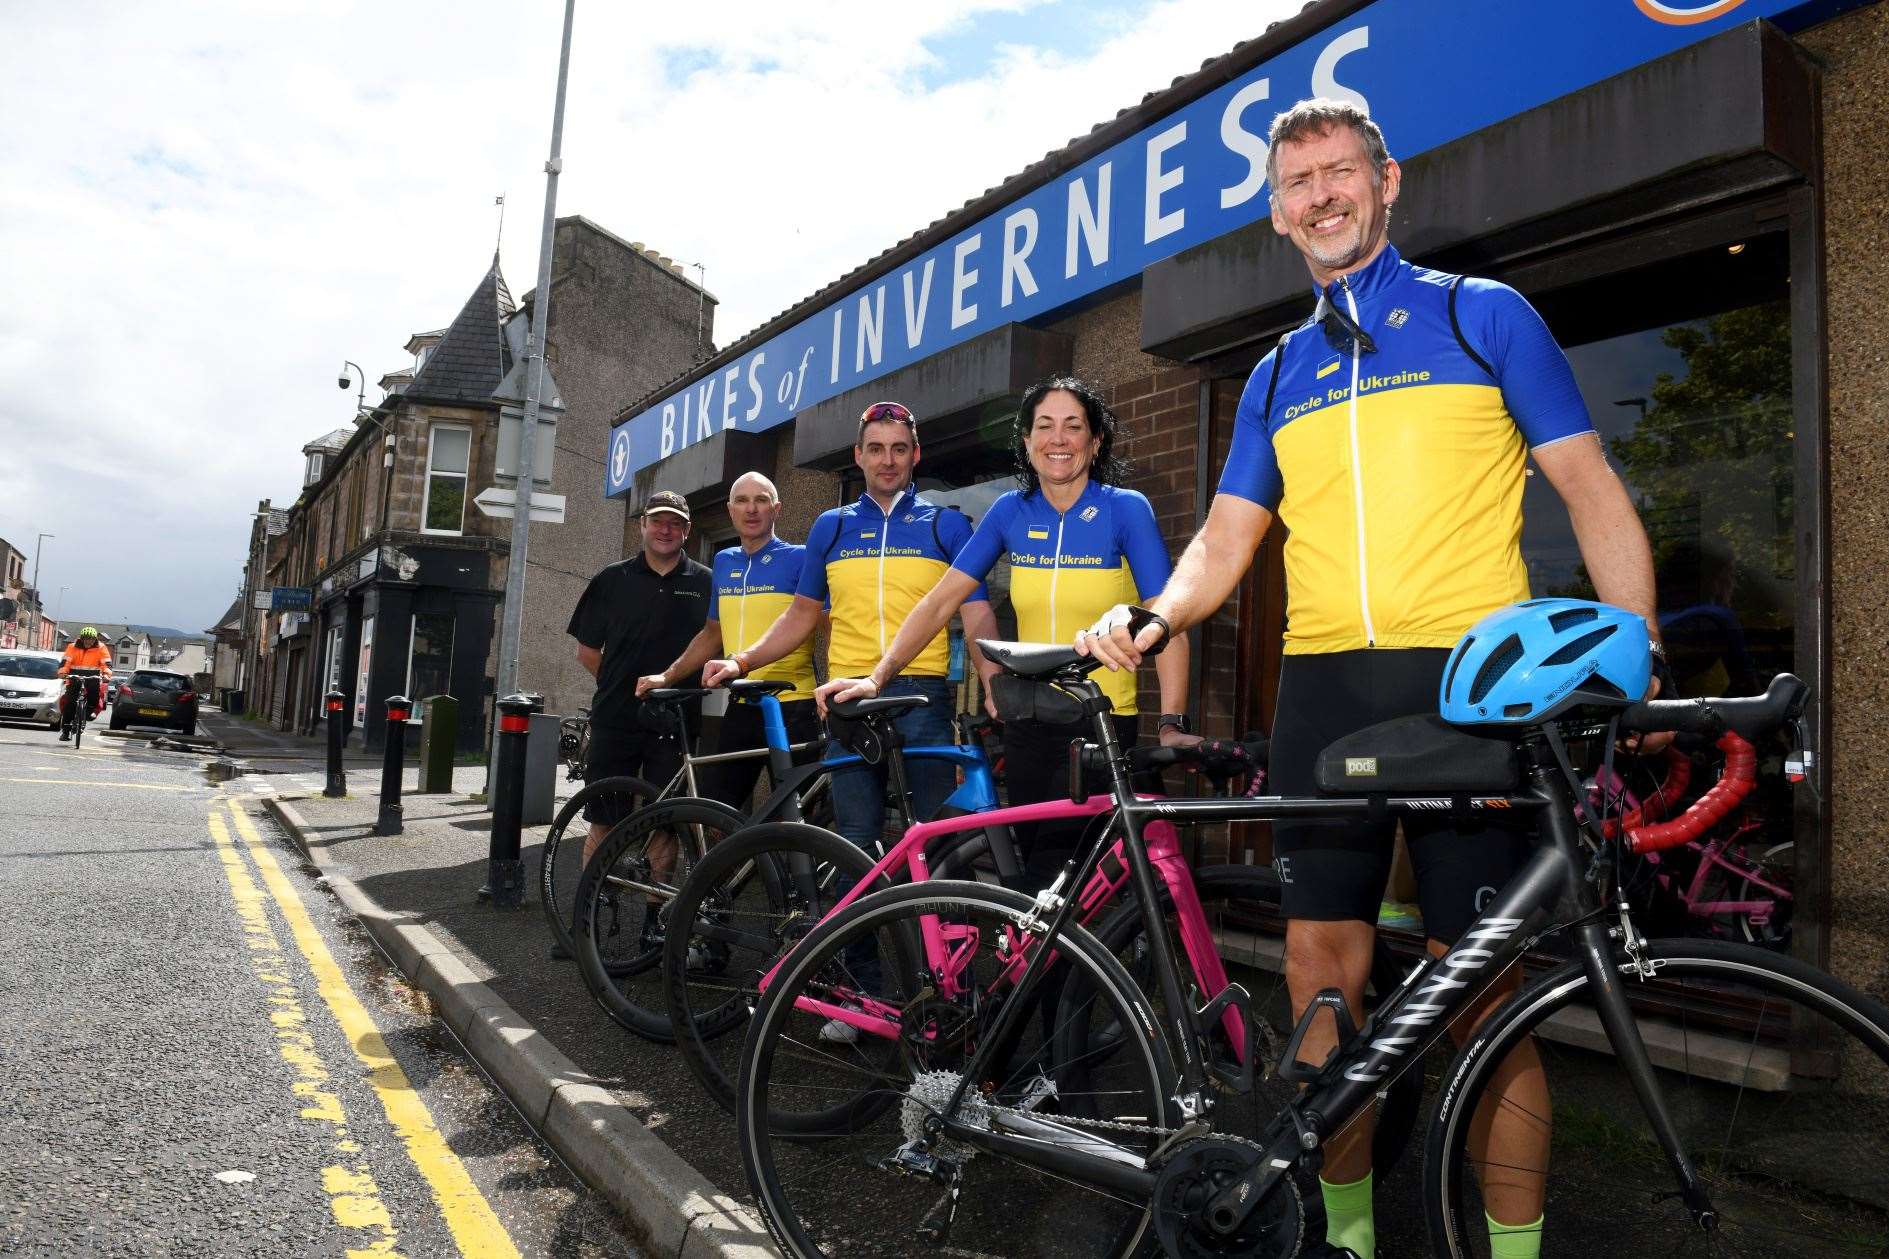 Roddie Riddle, of Bikes of Inverness, has words of encouragement for Derek Paterson, Mike Anderson, Lynne Cordiner and Andy Cowie as they take on the Lang Way Doon challenge.